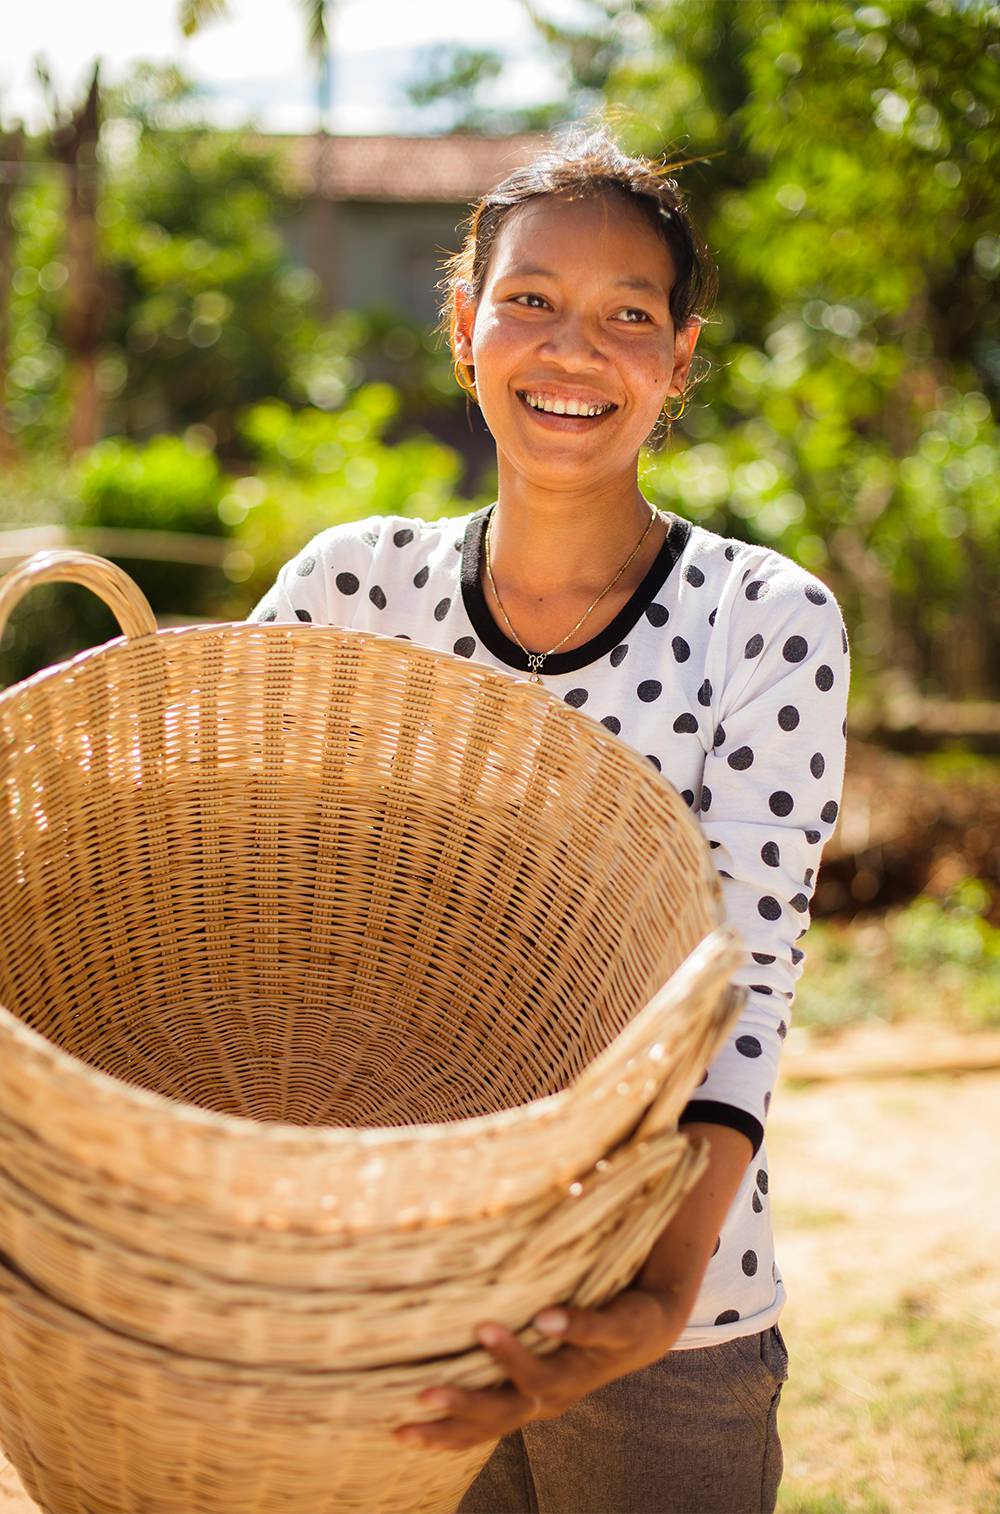 Woman holding baskets and smiling